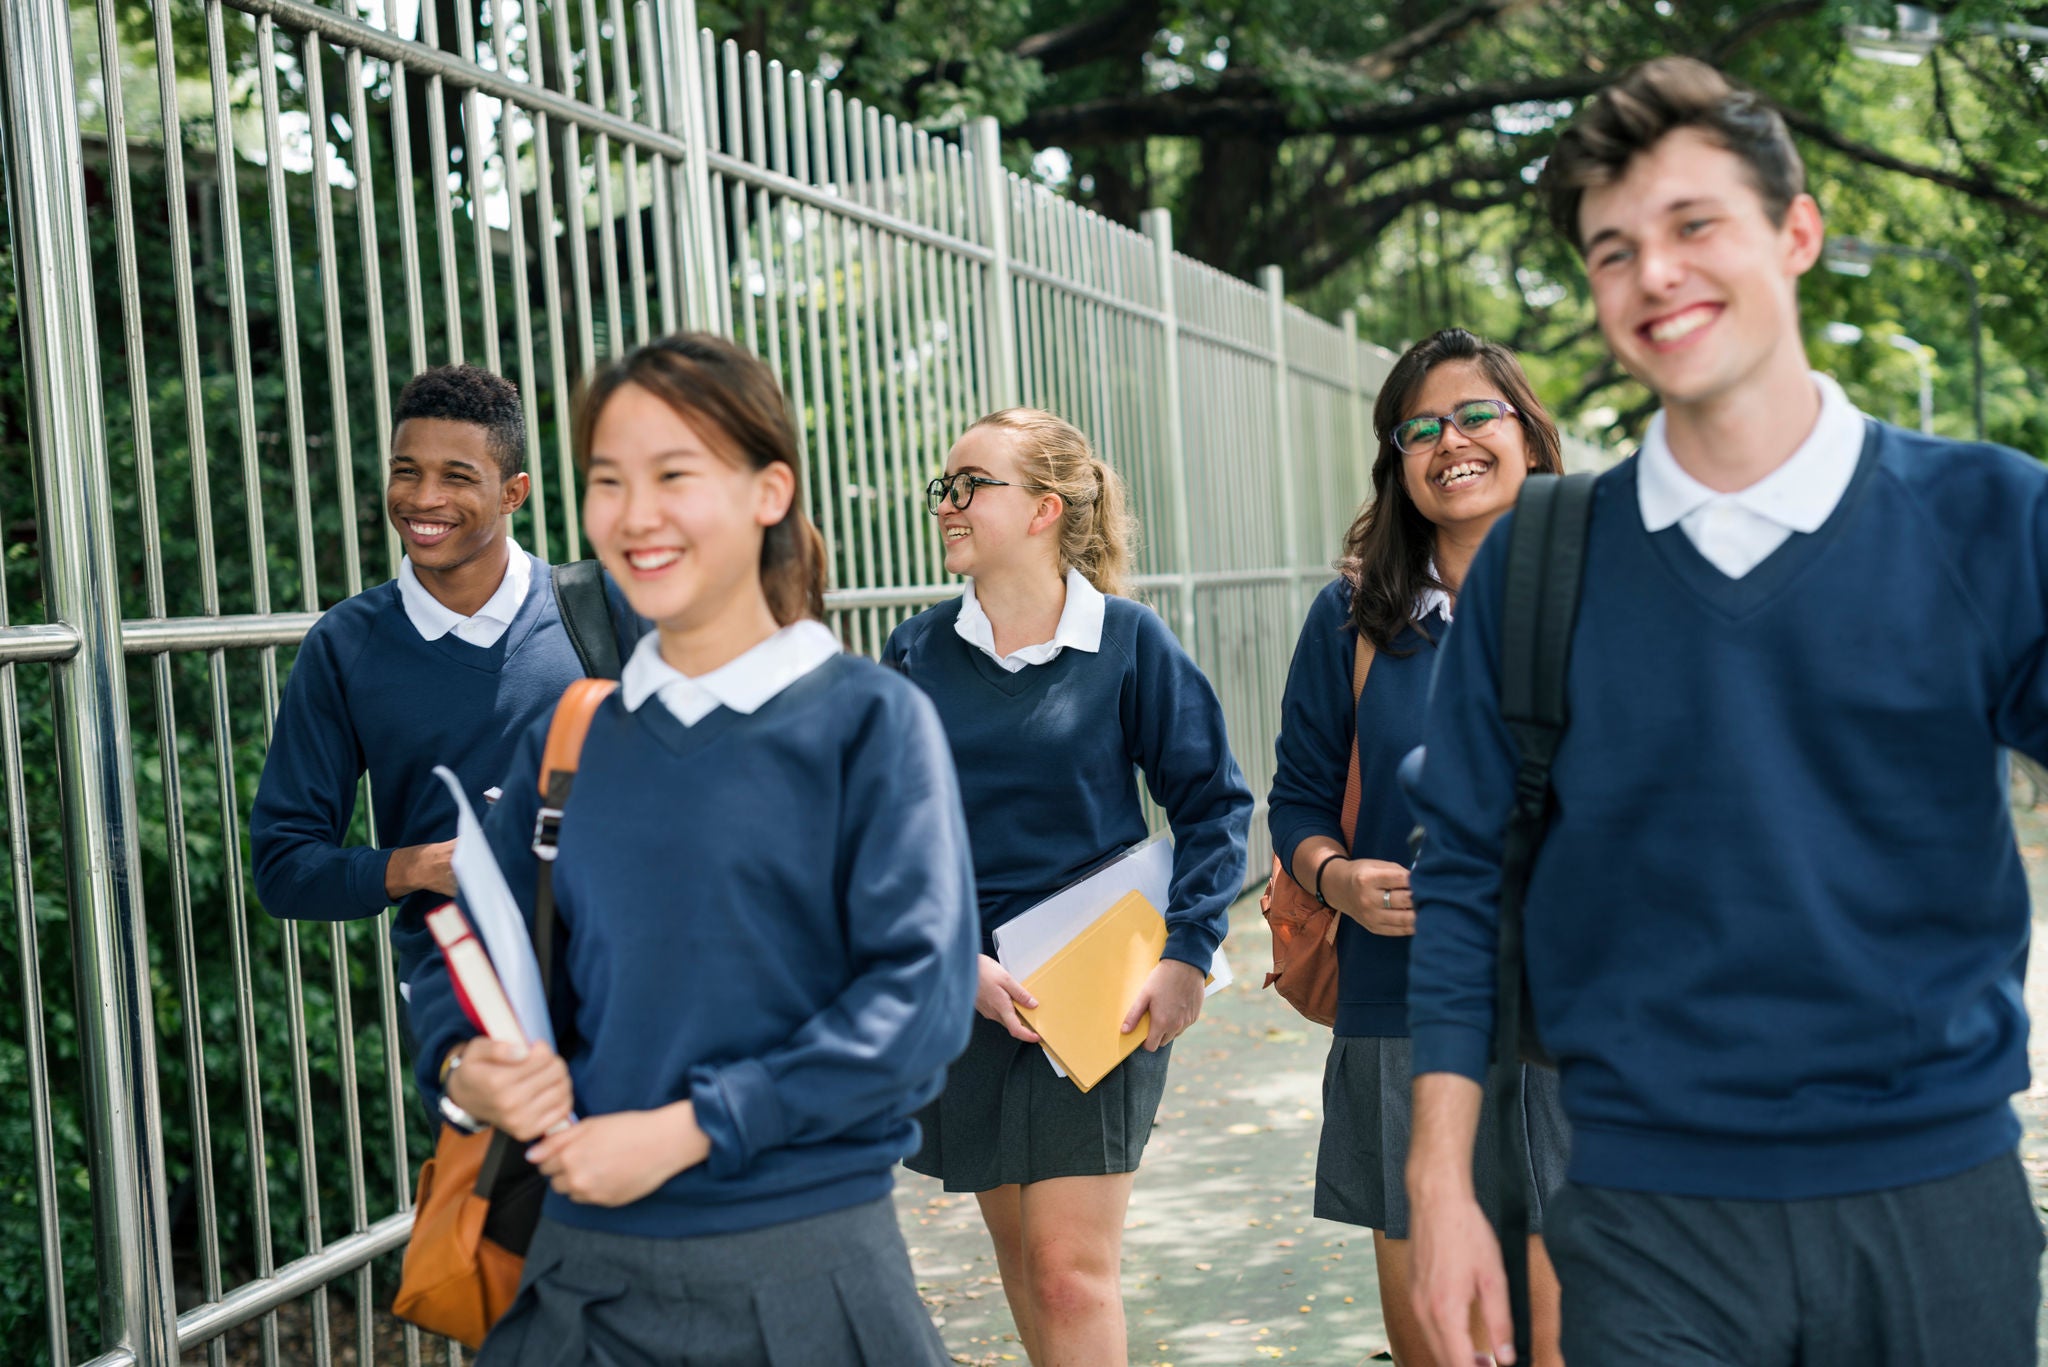 Group of five students walking to school smiling